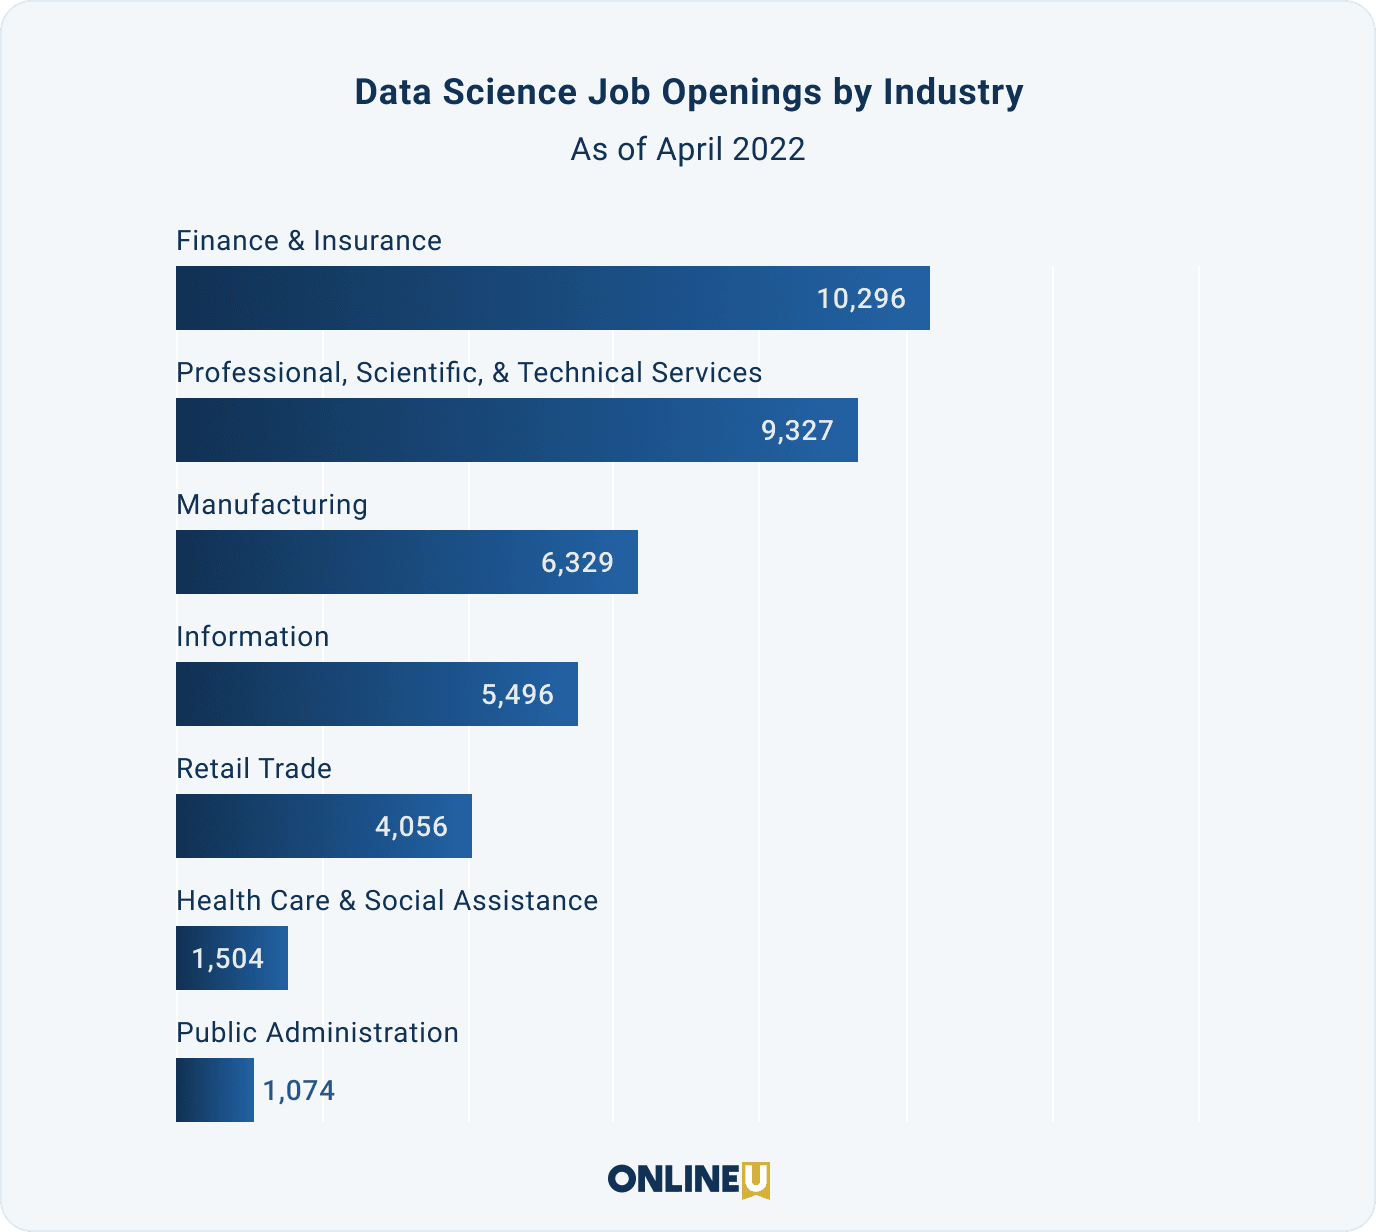 Braph showing data science job openings by industry